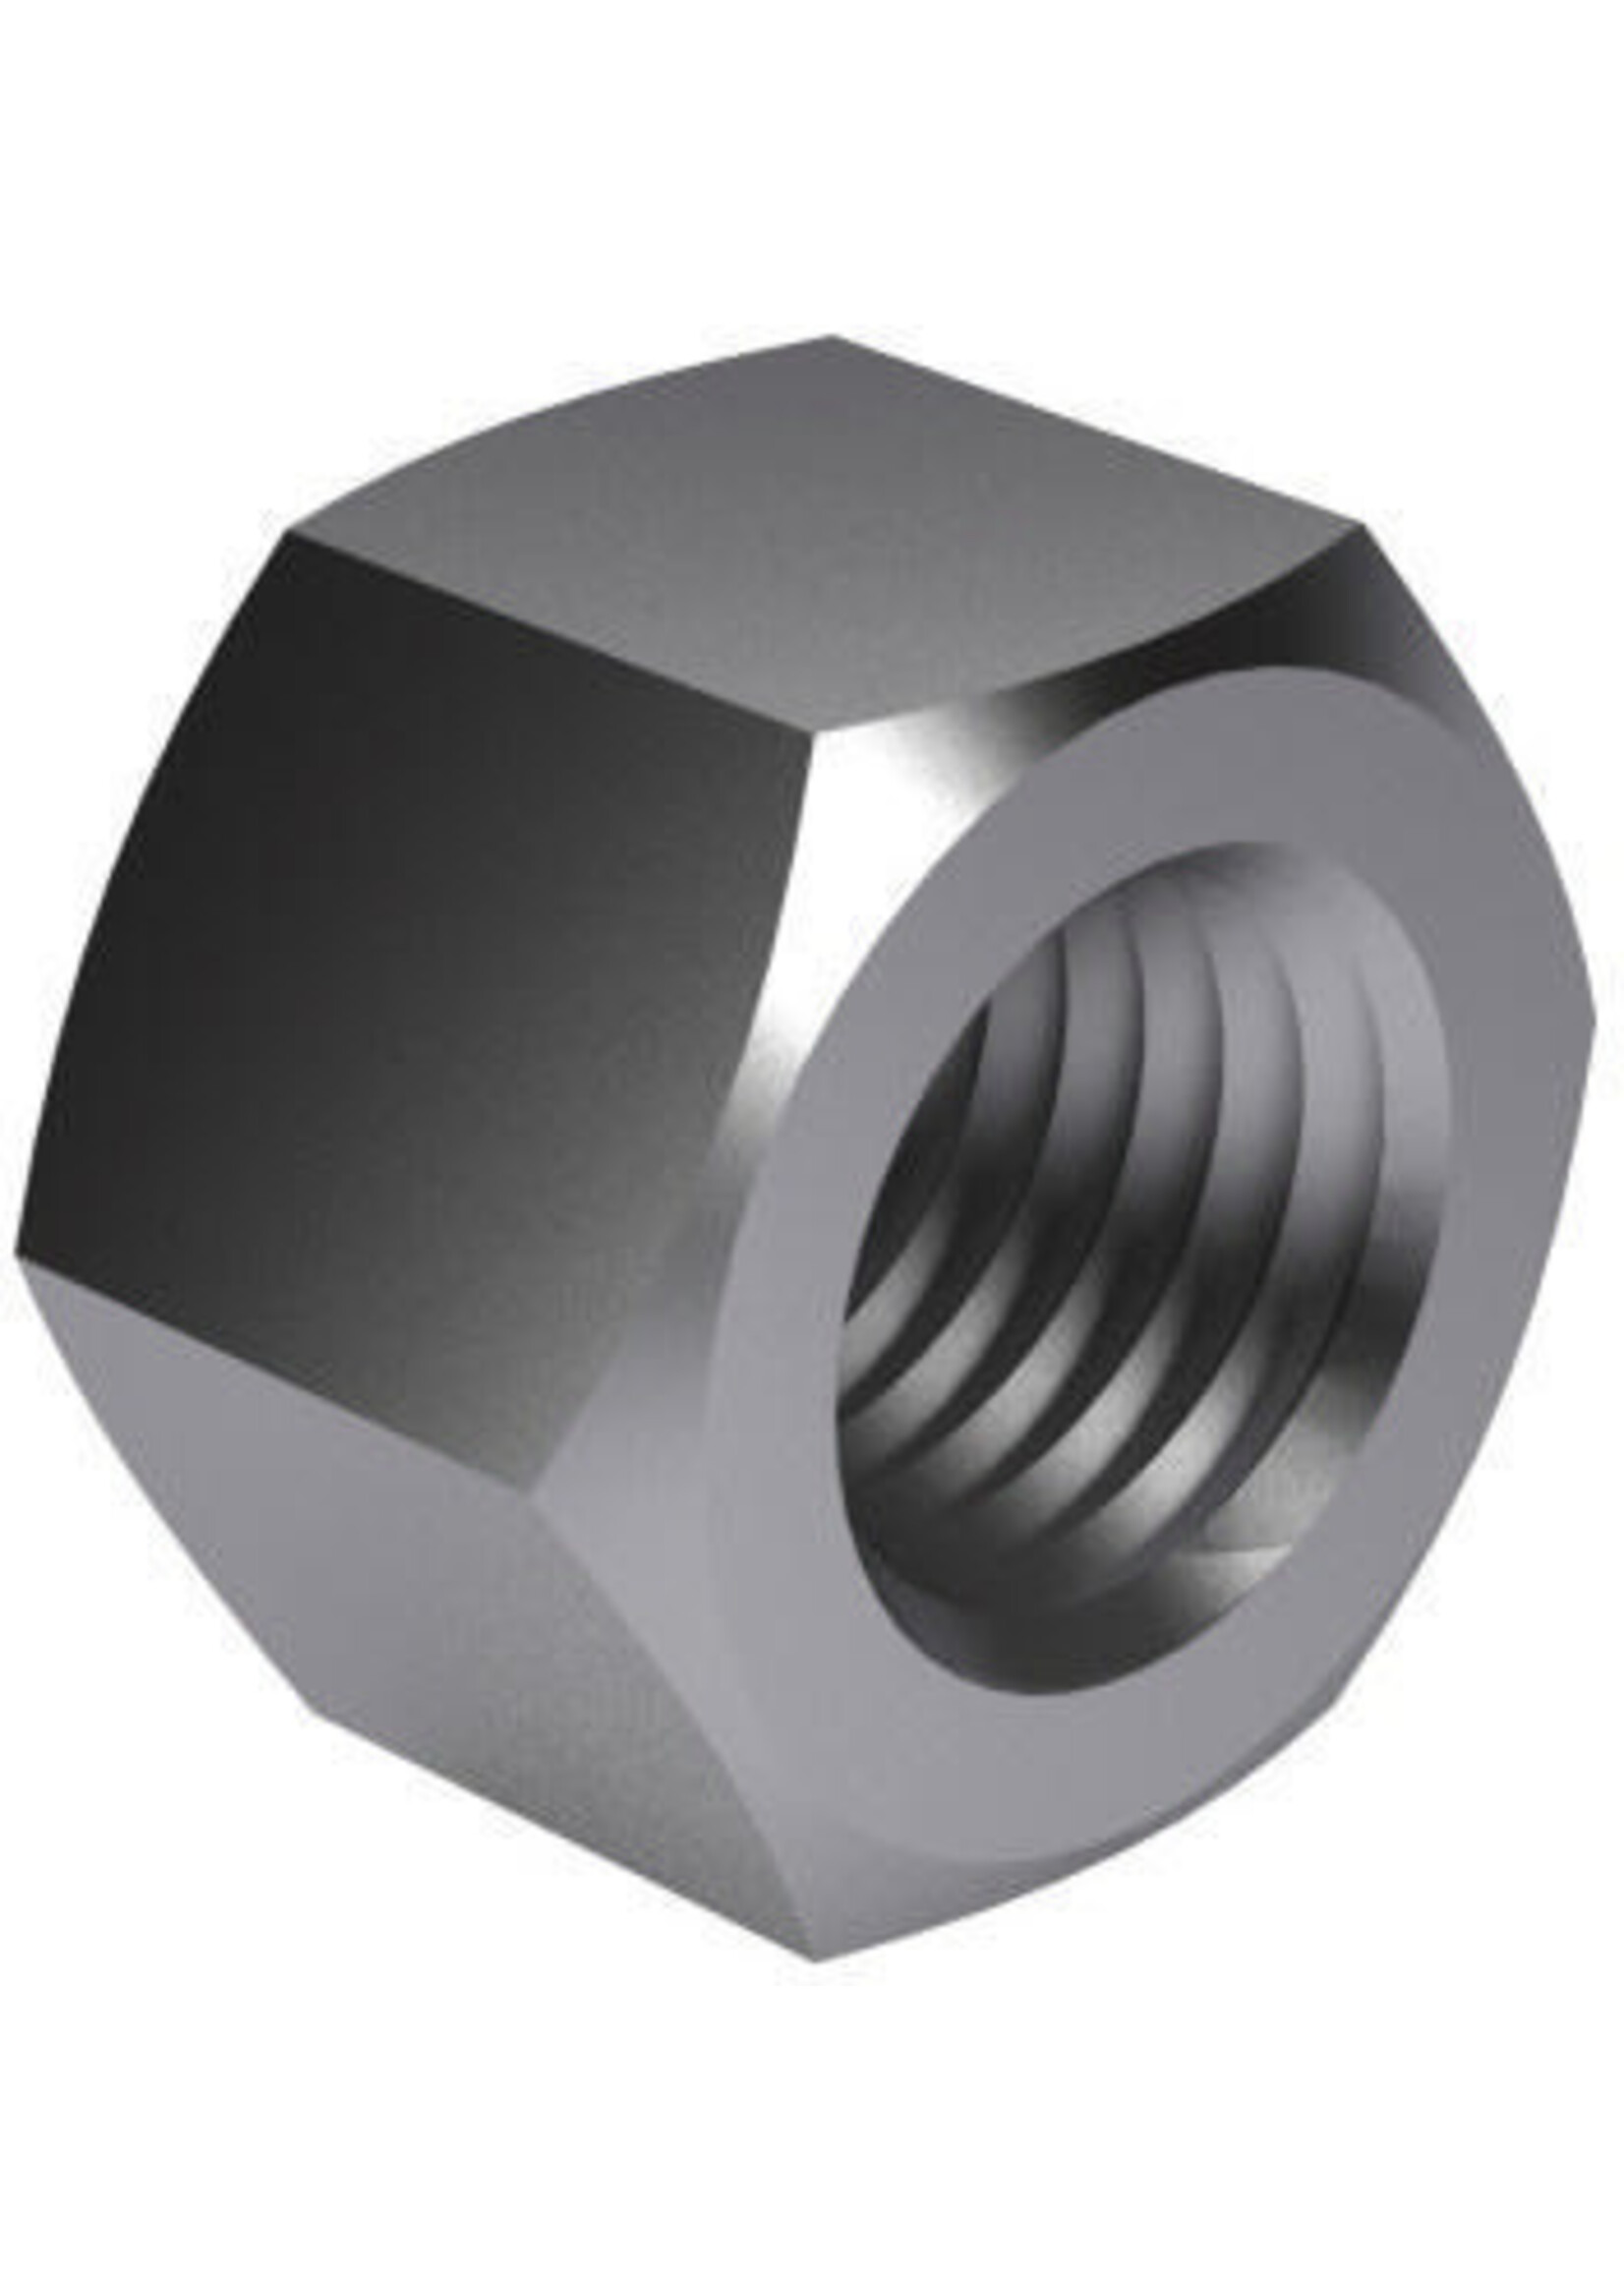 Universal Parts Self-locking hex nut all metal DIN 980V Steel Electrolytically zinc plated 8 M4